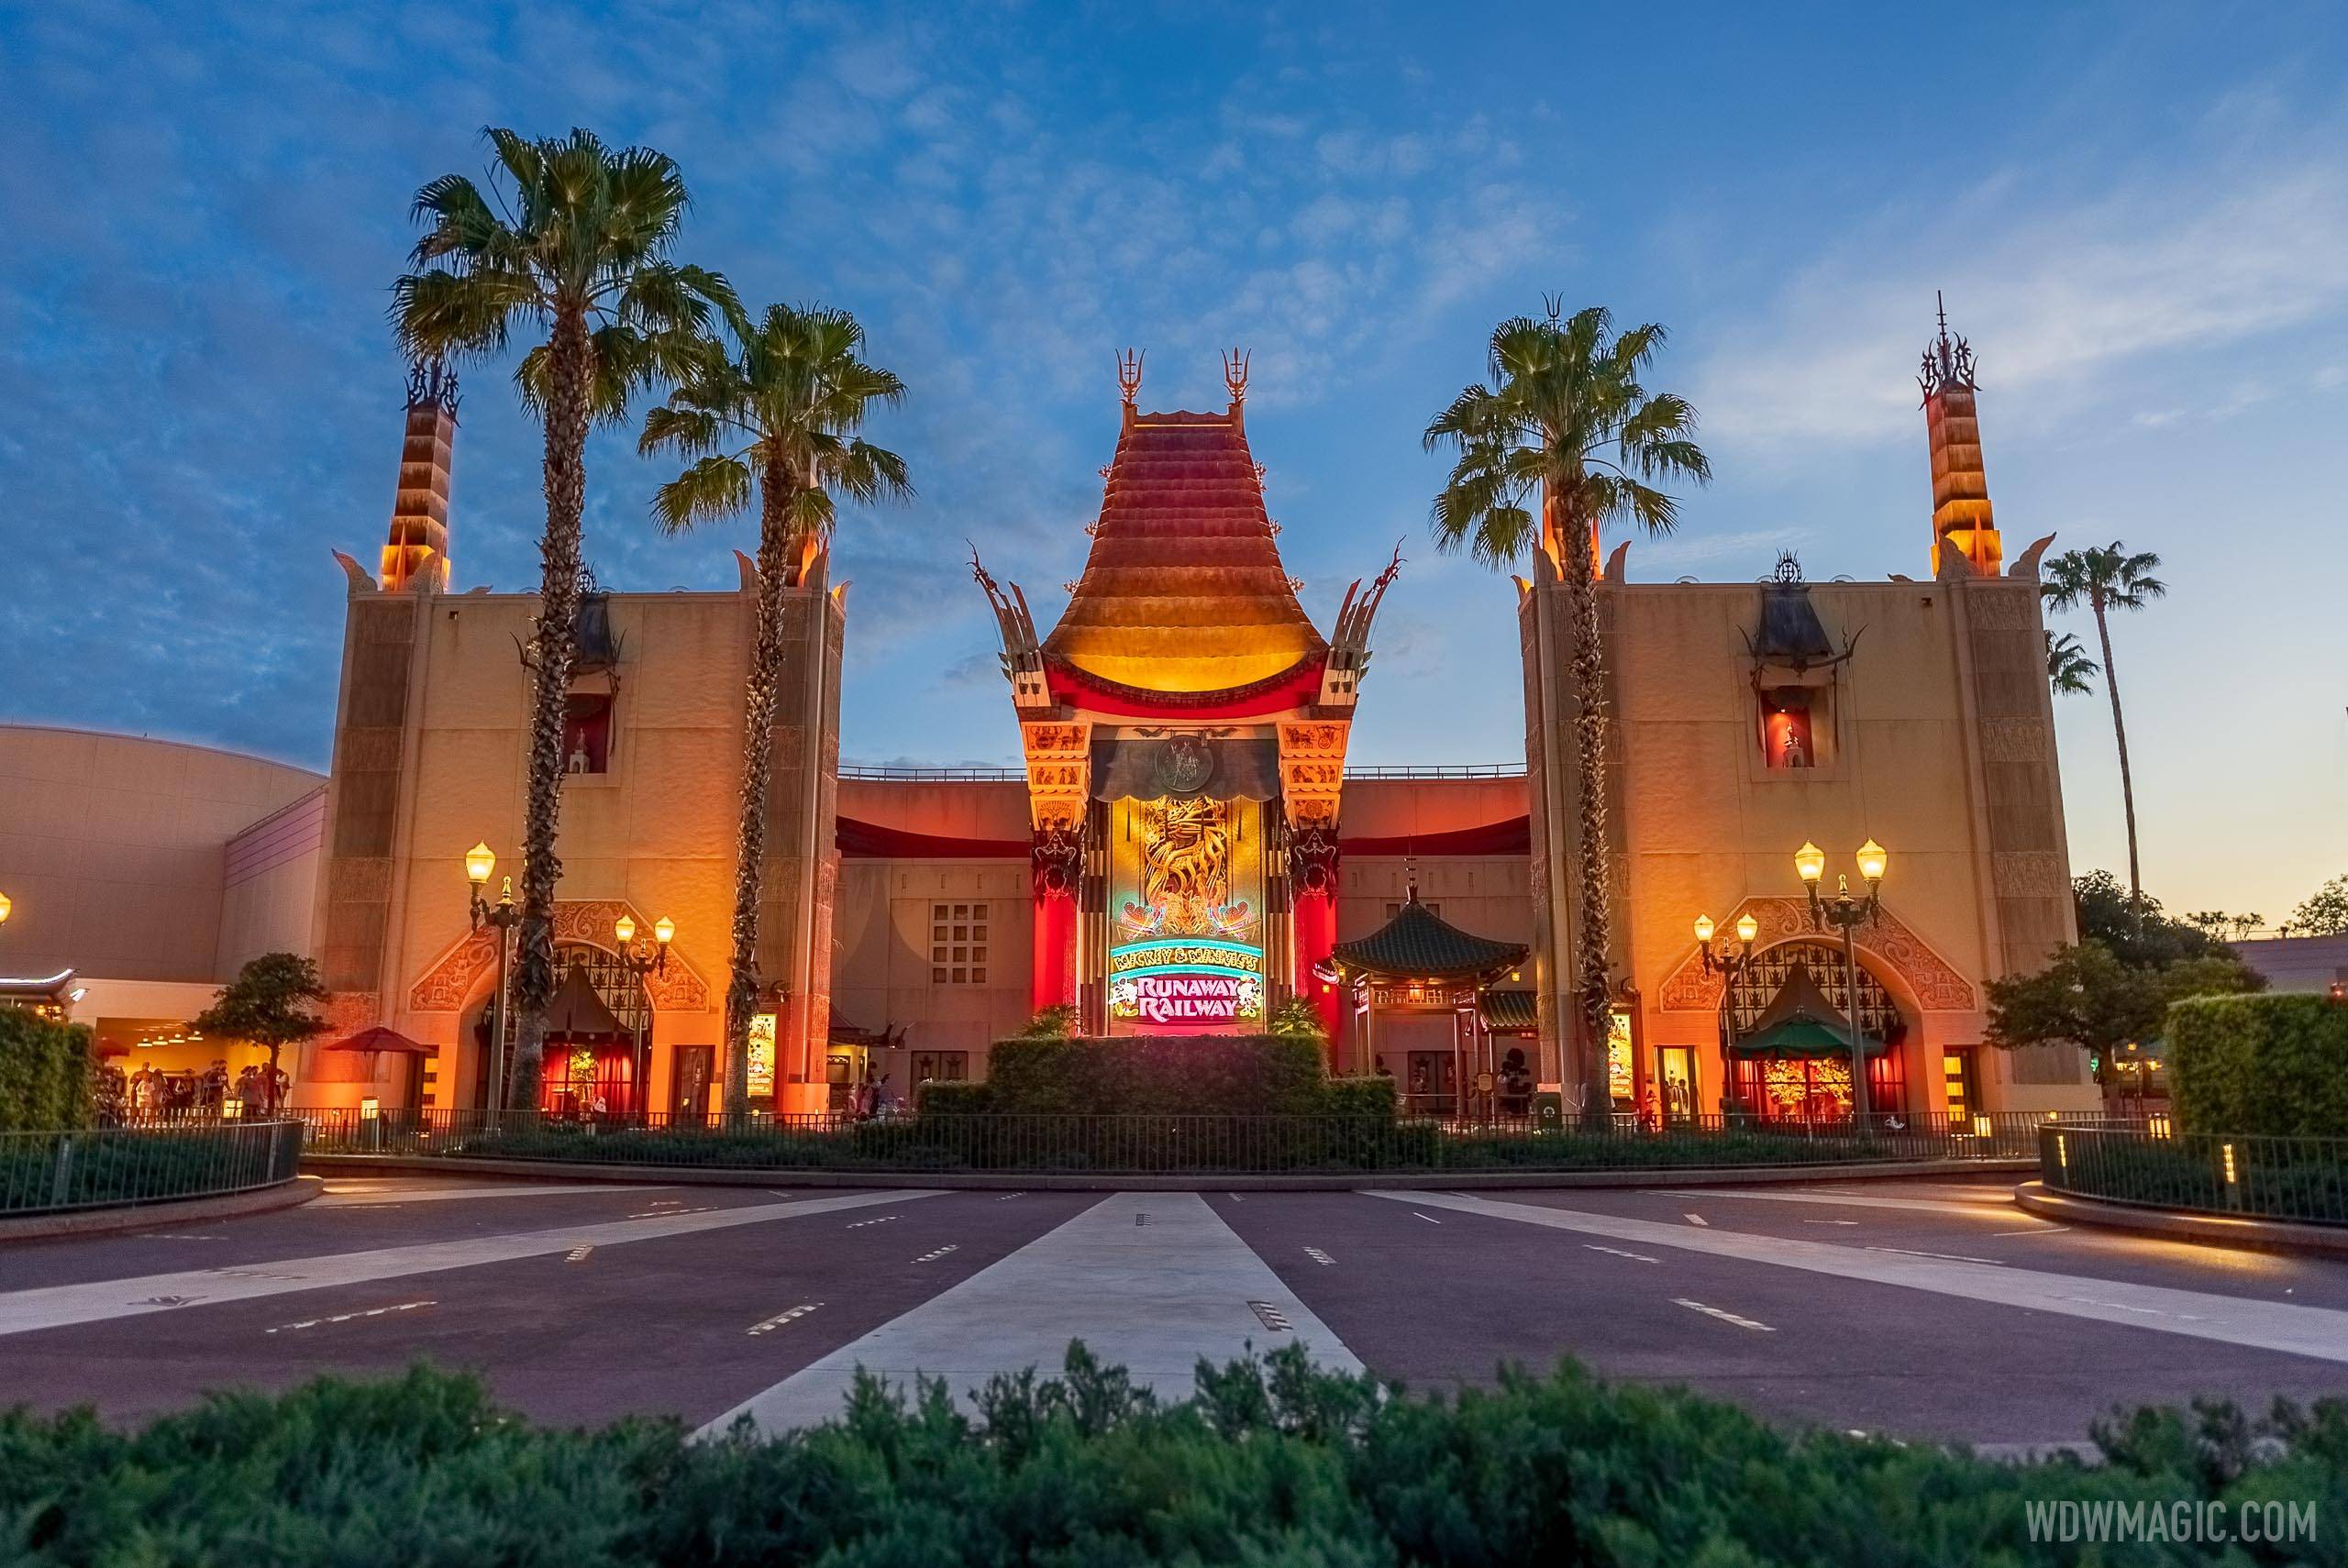 Disney's Hollywood Studios will be open for an additional 2 hours for resort guests starting April 2022.